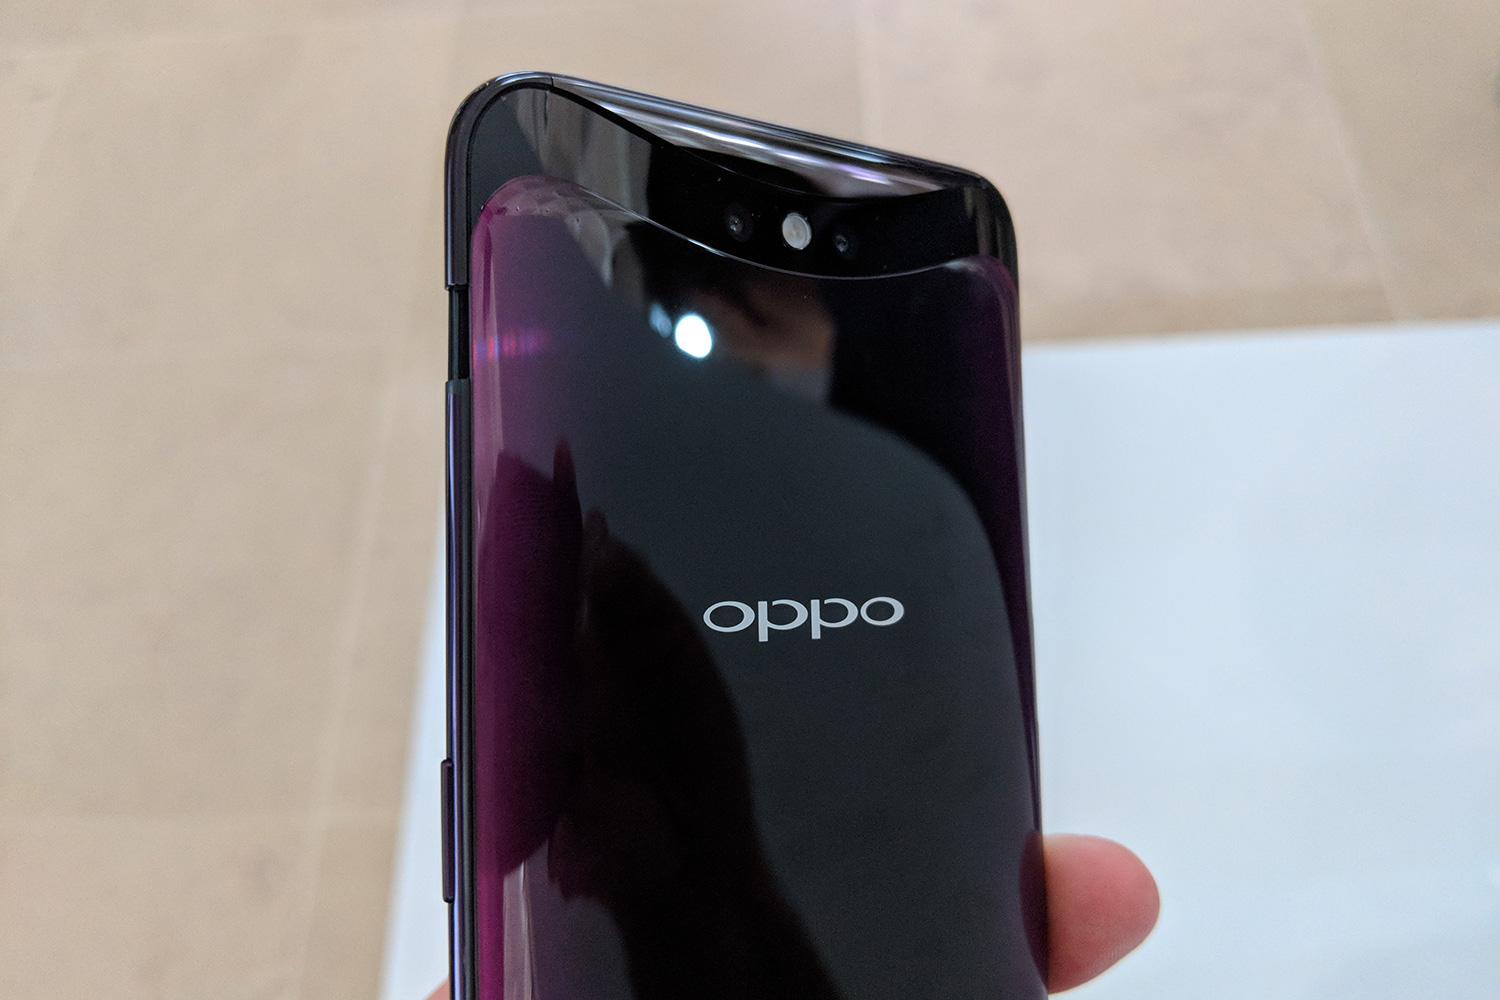 Oppo Find X: Flagship Specs, No Notch, and an Amazing Secret